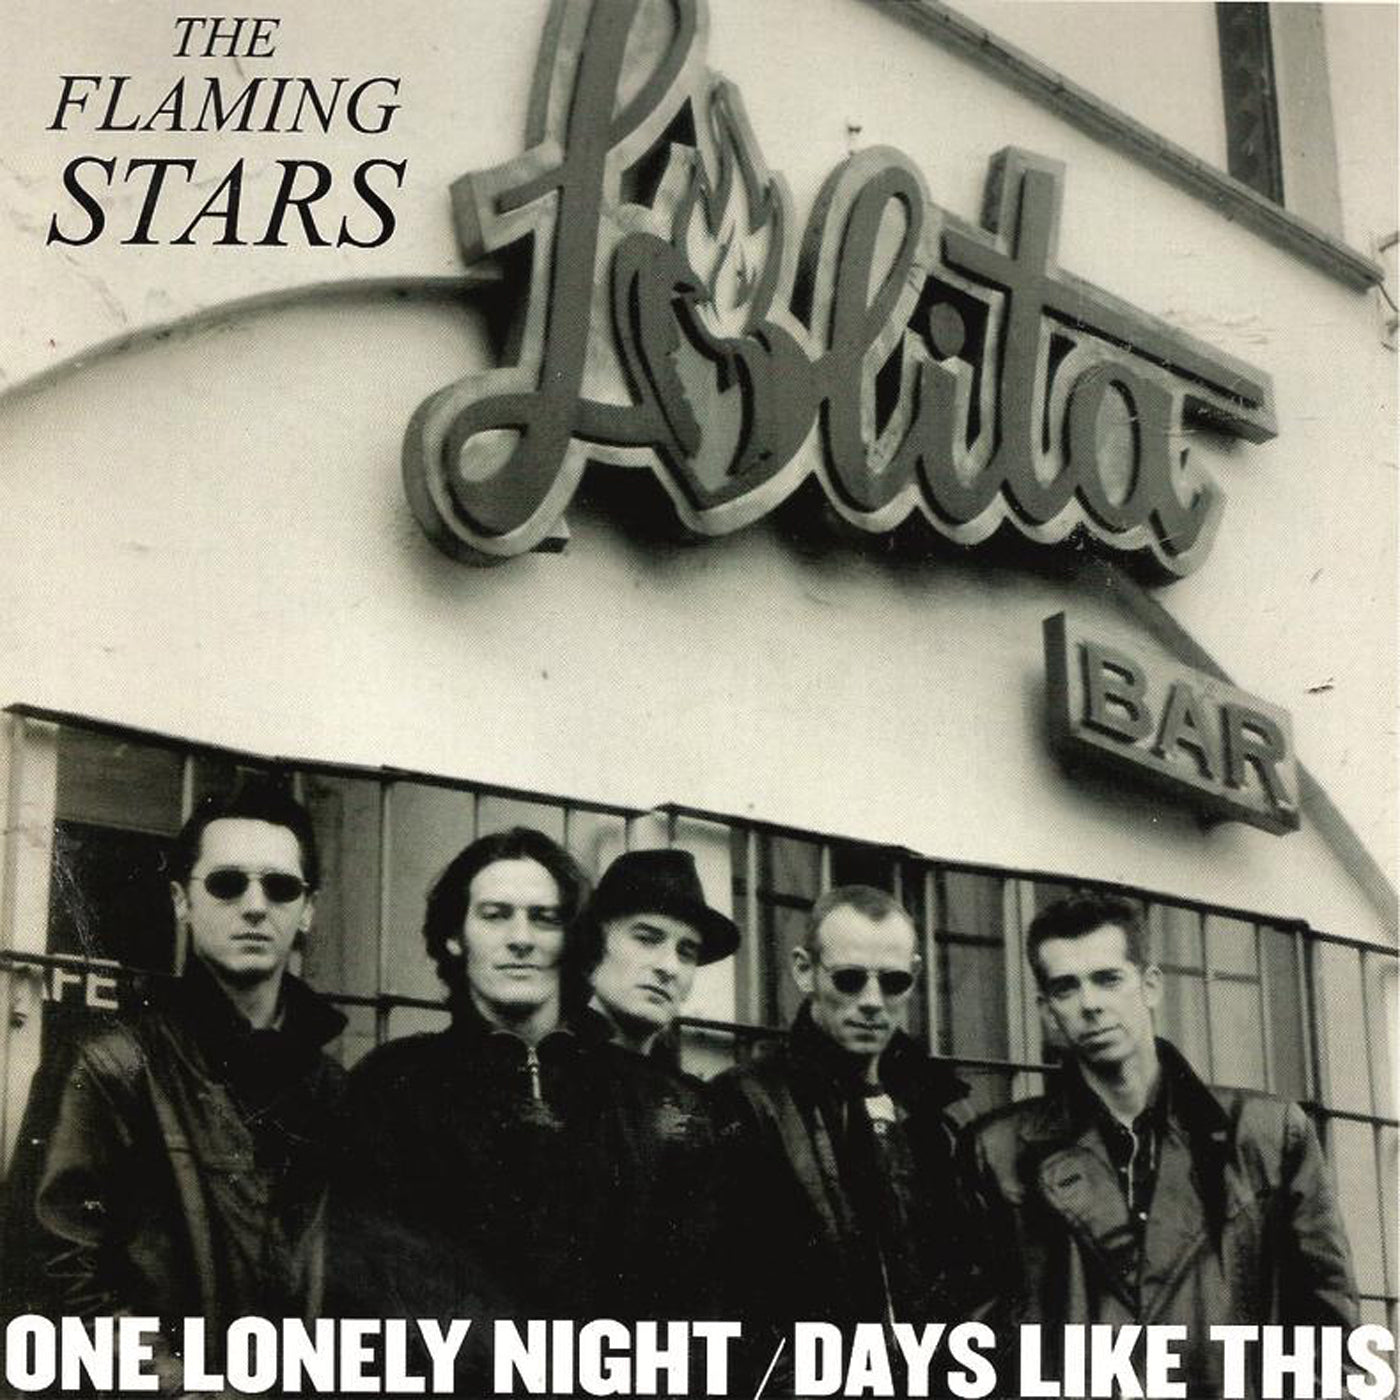 v267 - The Flaming Stars - "One Lonely Night / Days Like This"